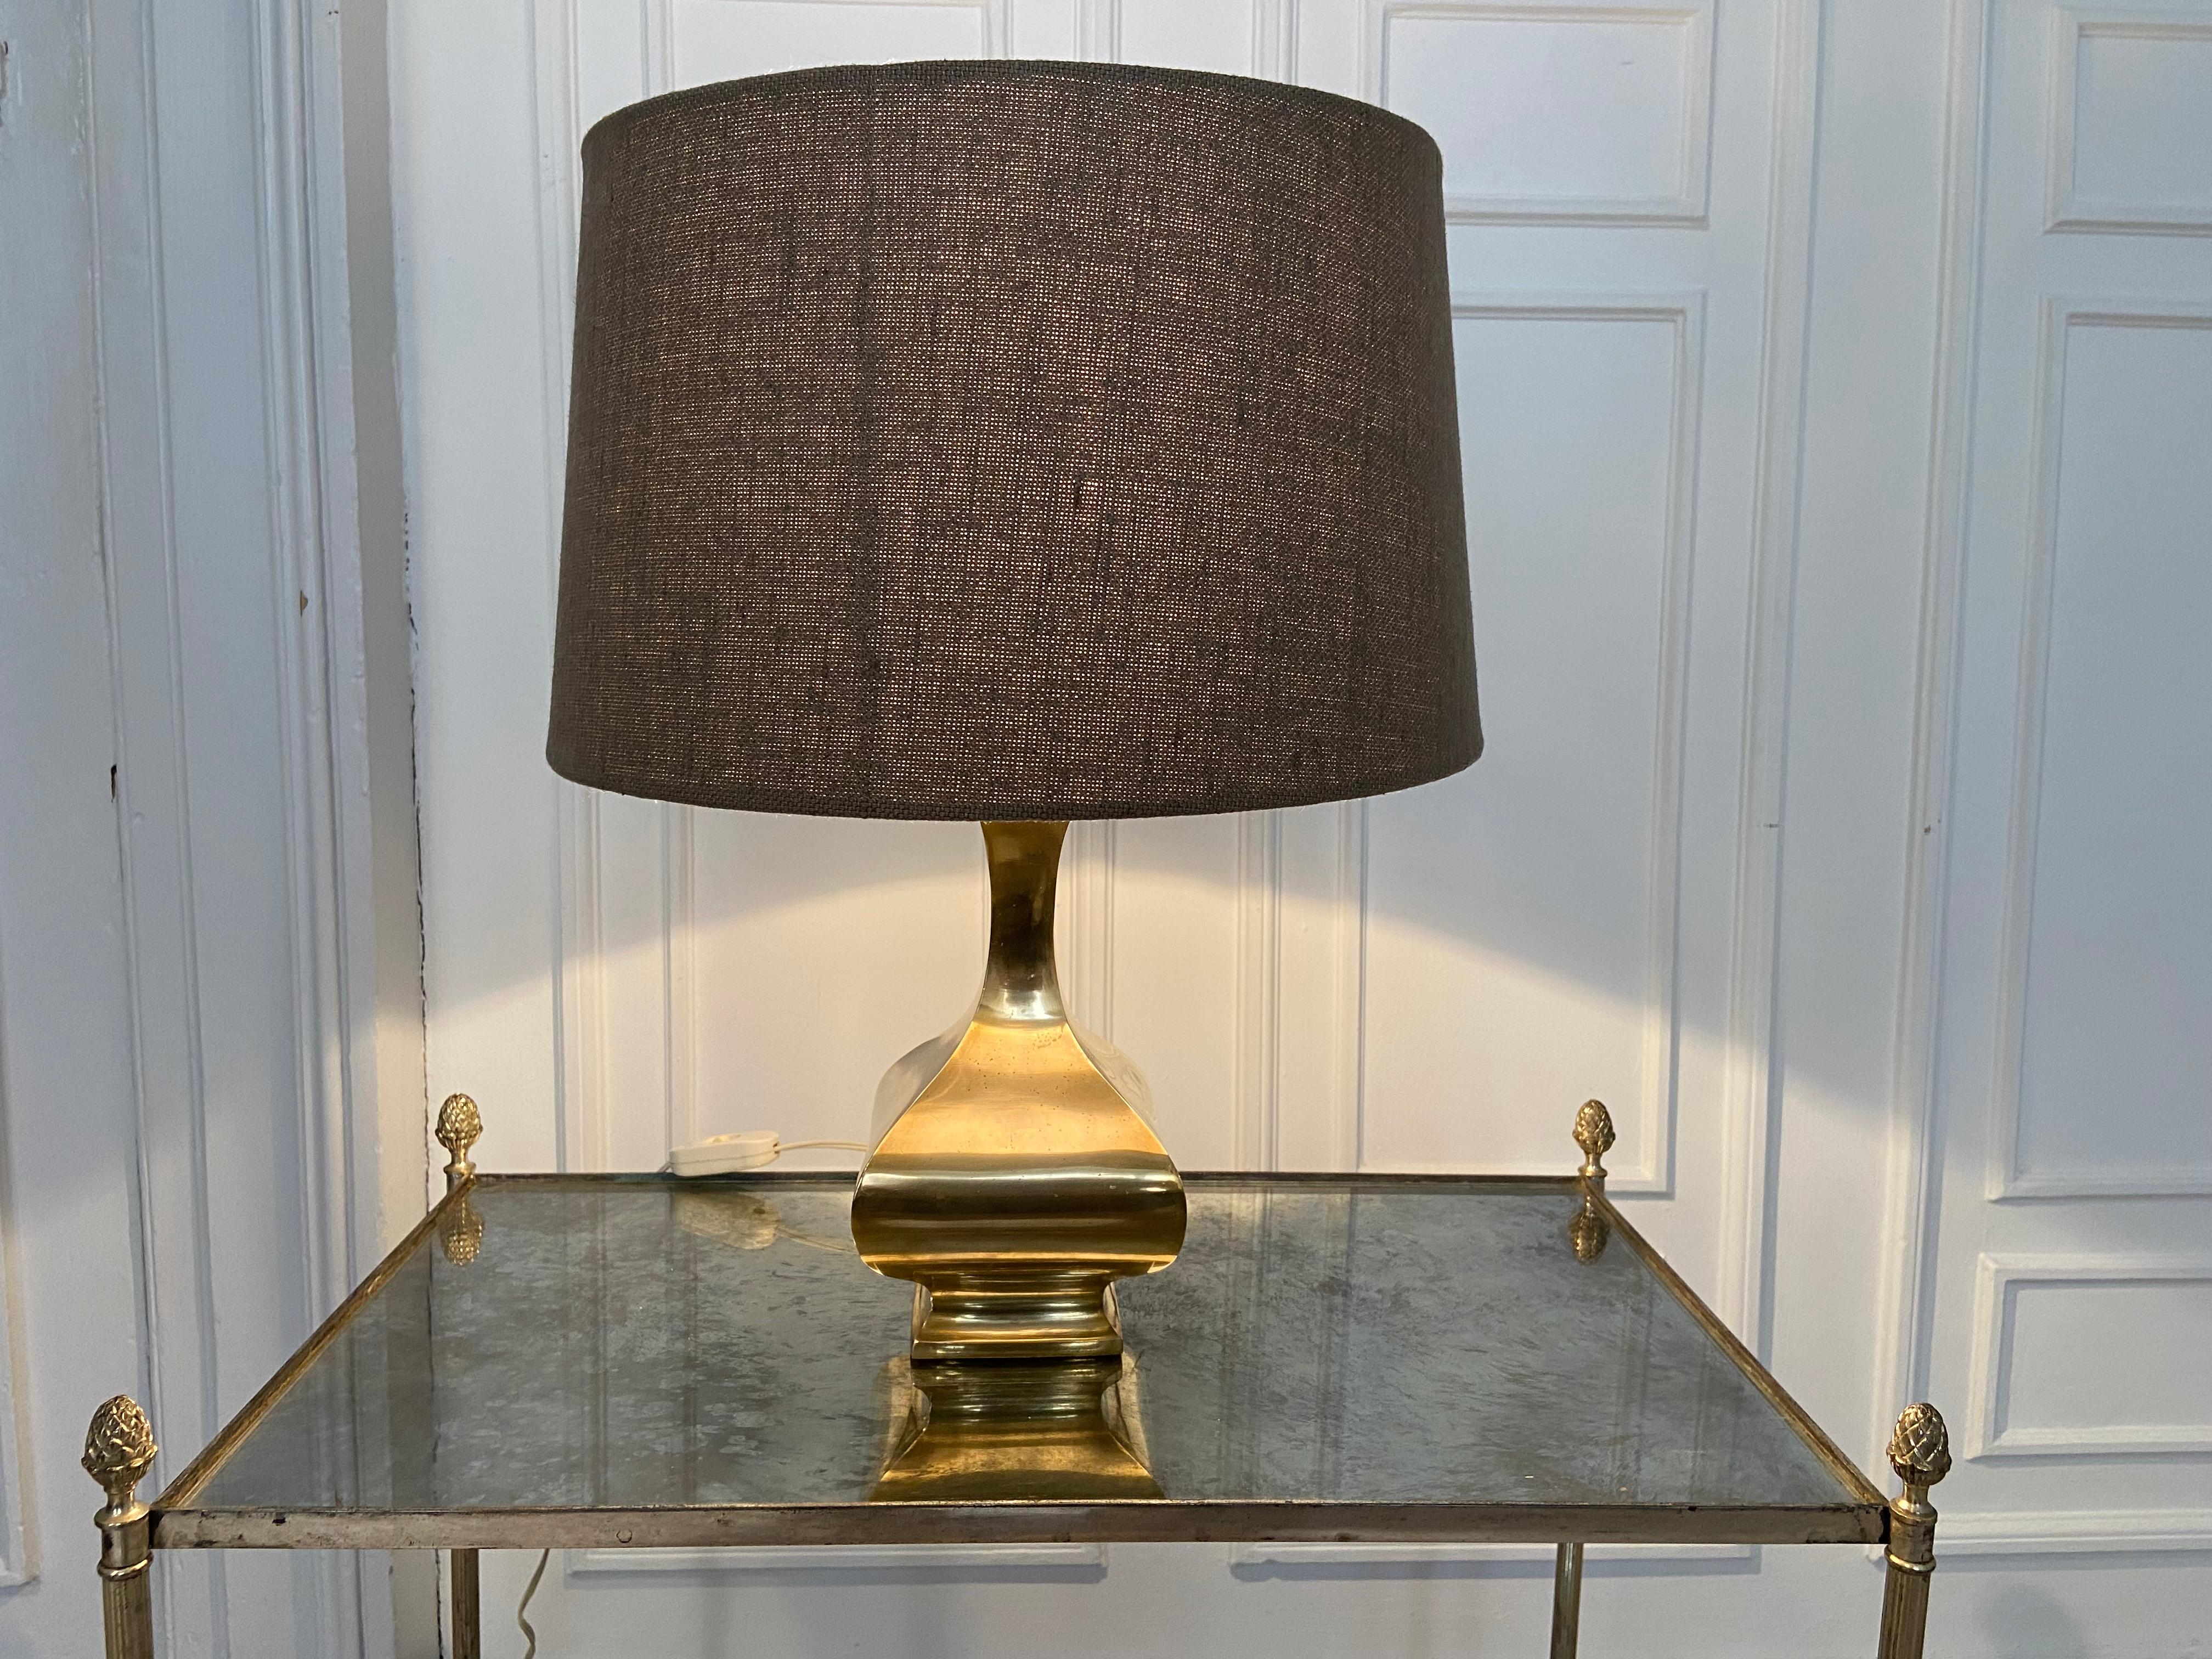 Brass lamp in the style of maria pergay produced in the 70s. Good vintage condition.